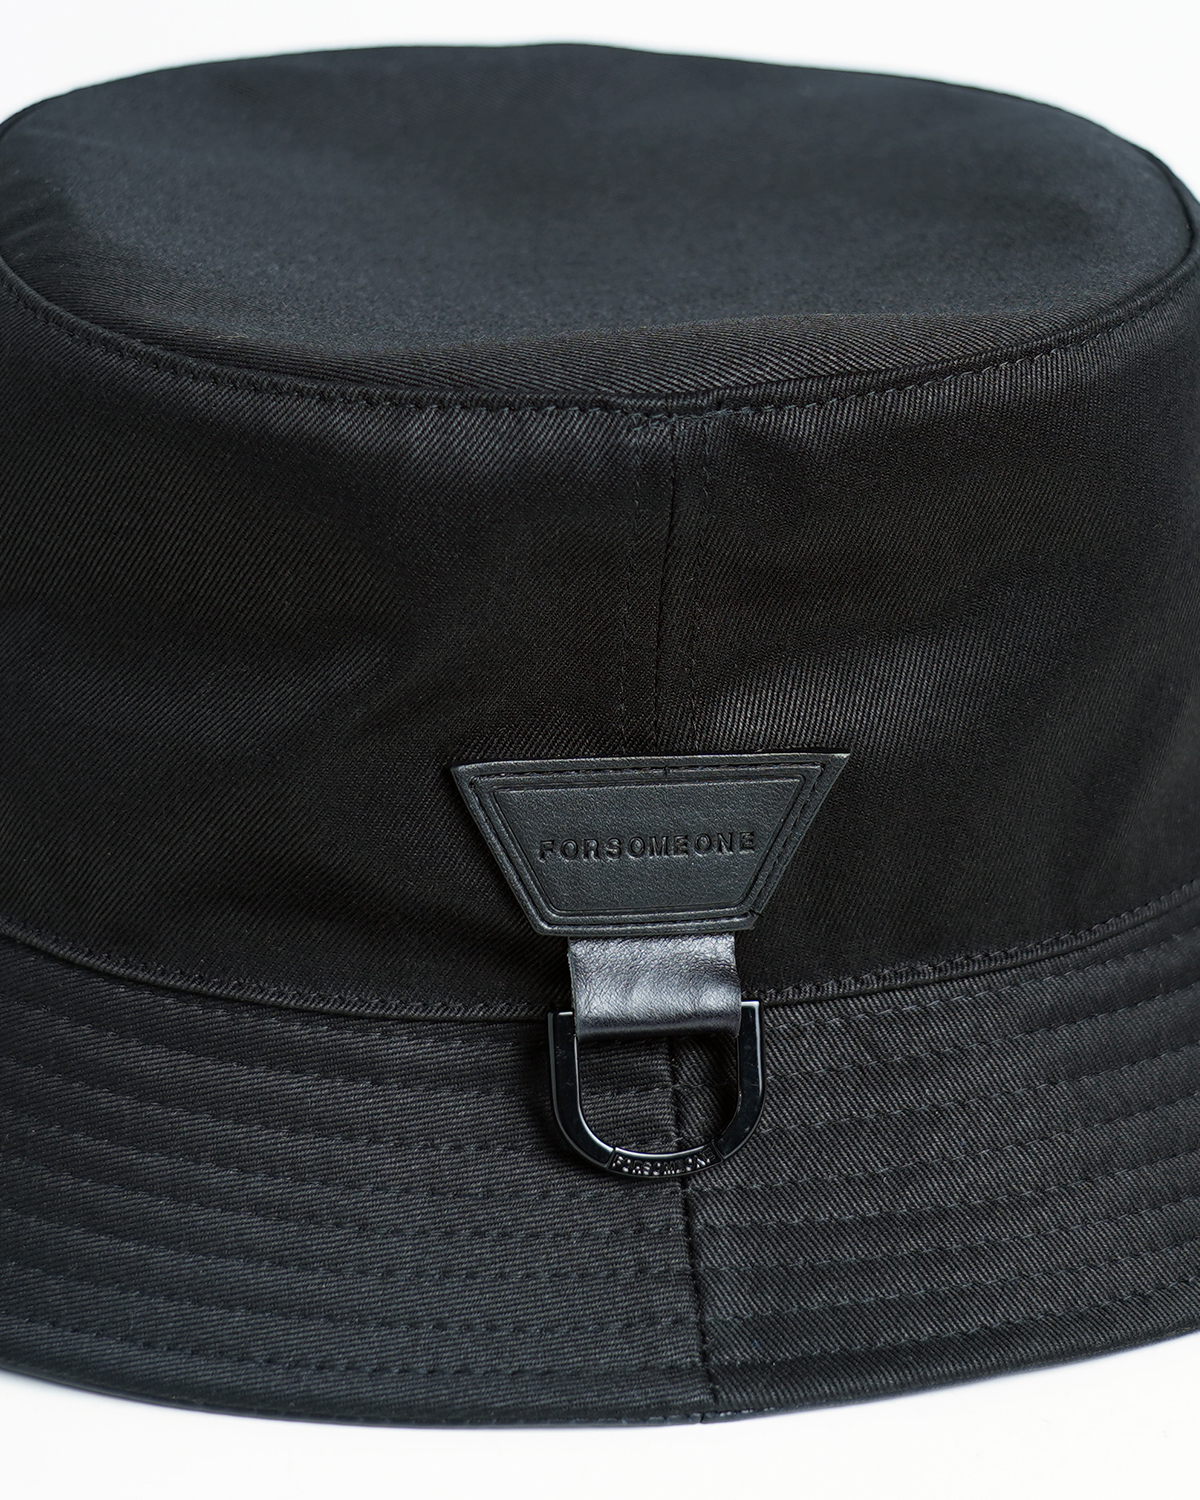 COTTON MOUNT HAT 2.0 | FORSOMEONE(フォーサムワン)公式ONLINE STORE